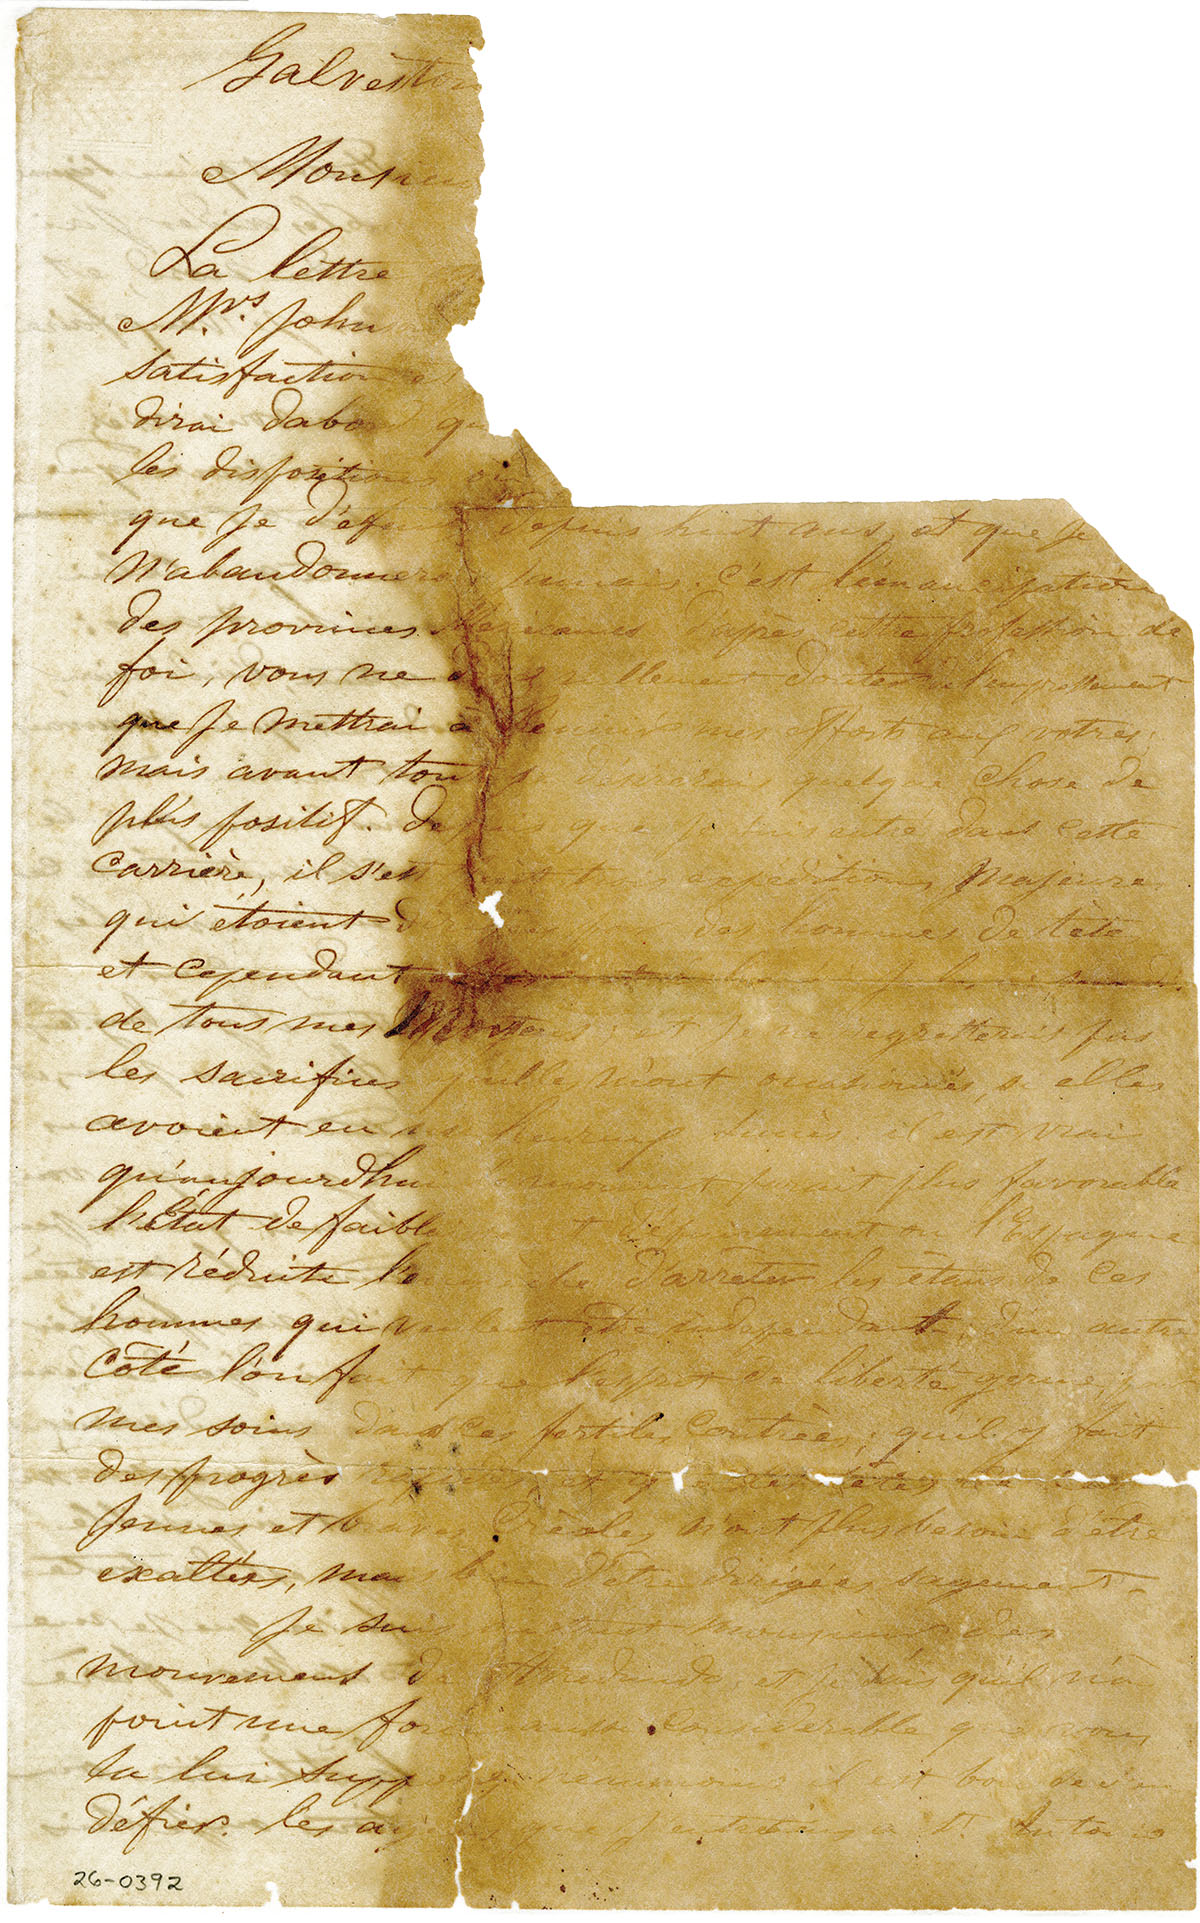 Lafitte's letter to James Long